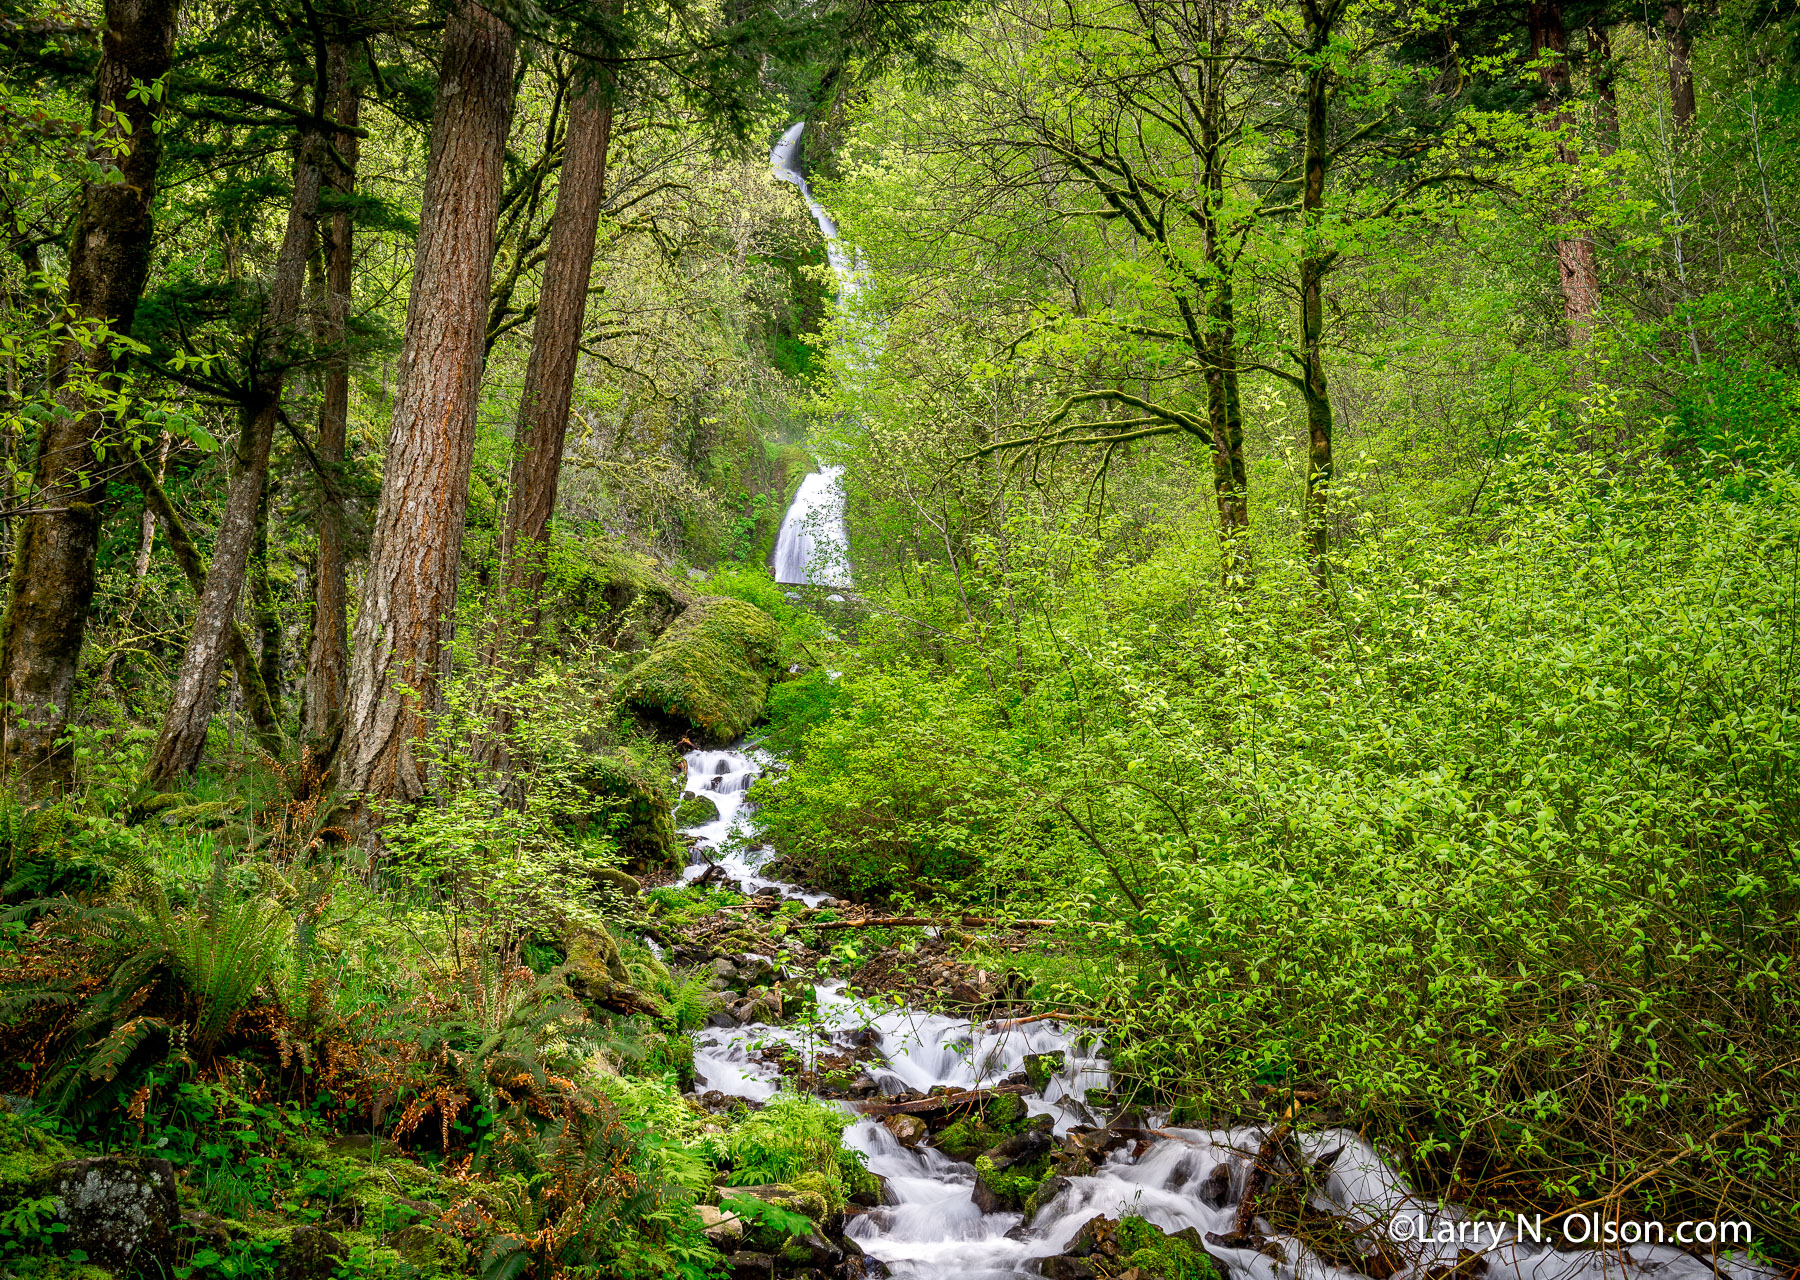 Waukeena creek, OR | The Columbia River Gorge is aglow with the bright green growth of spring.